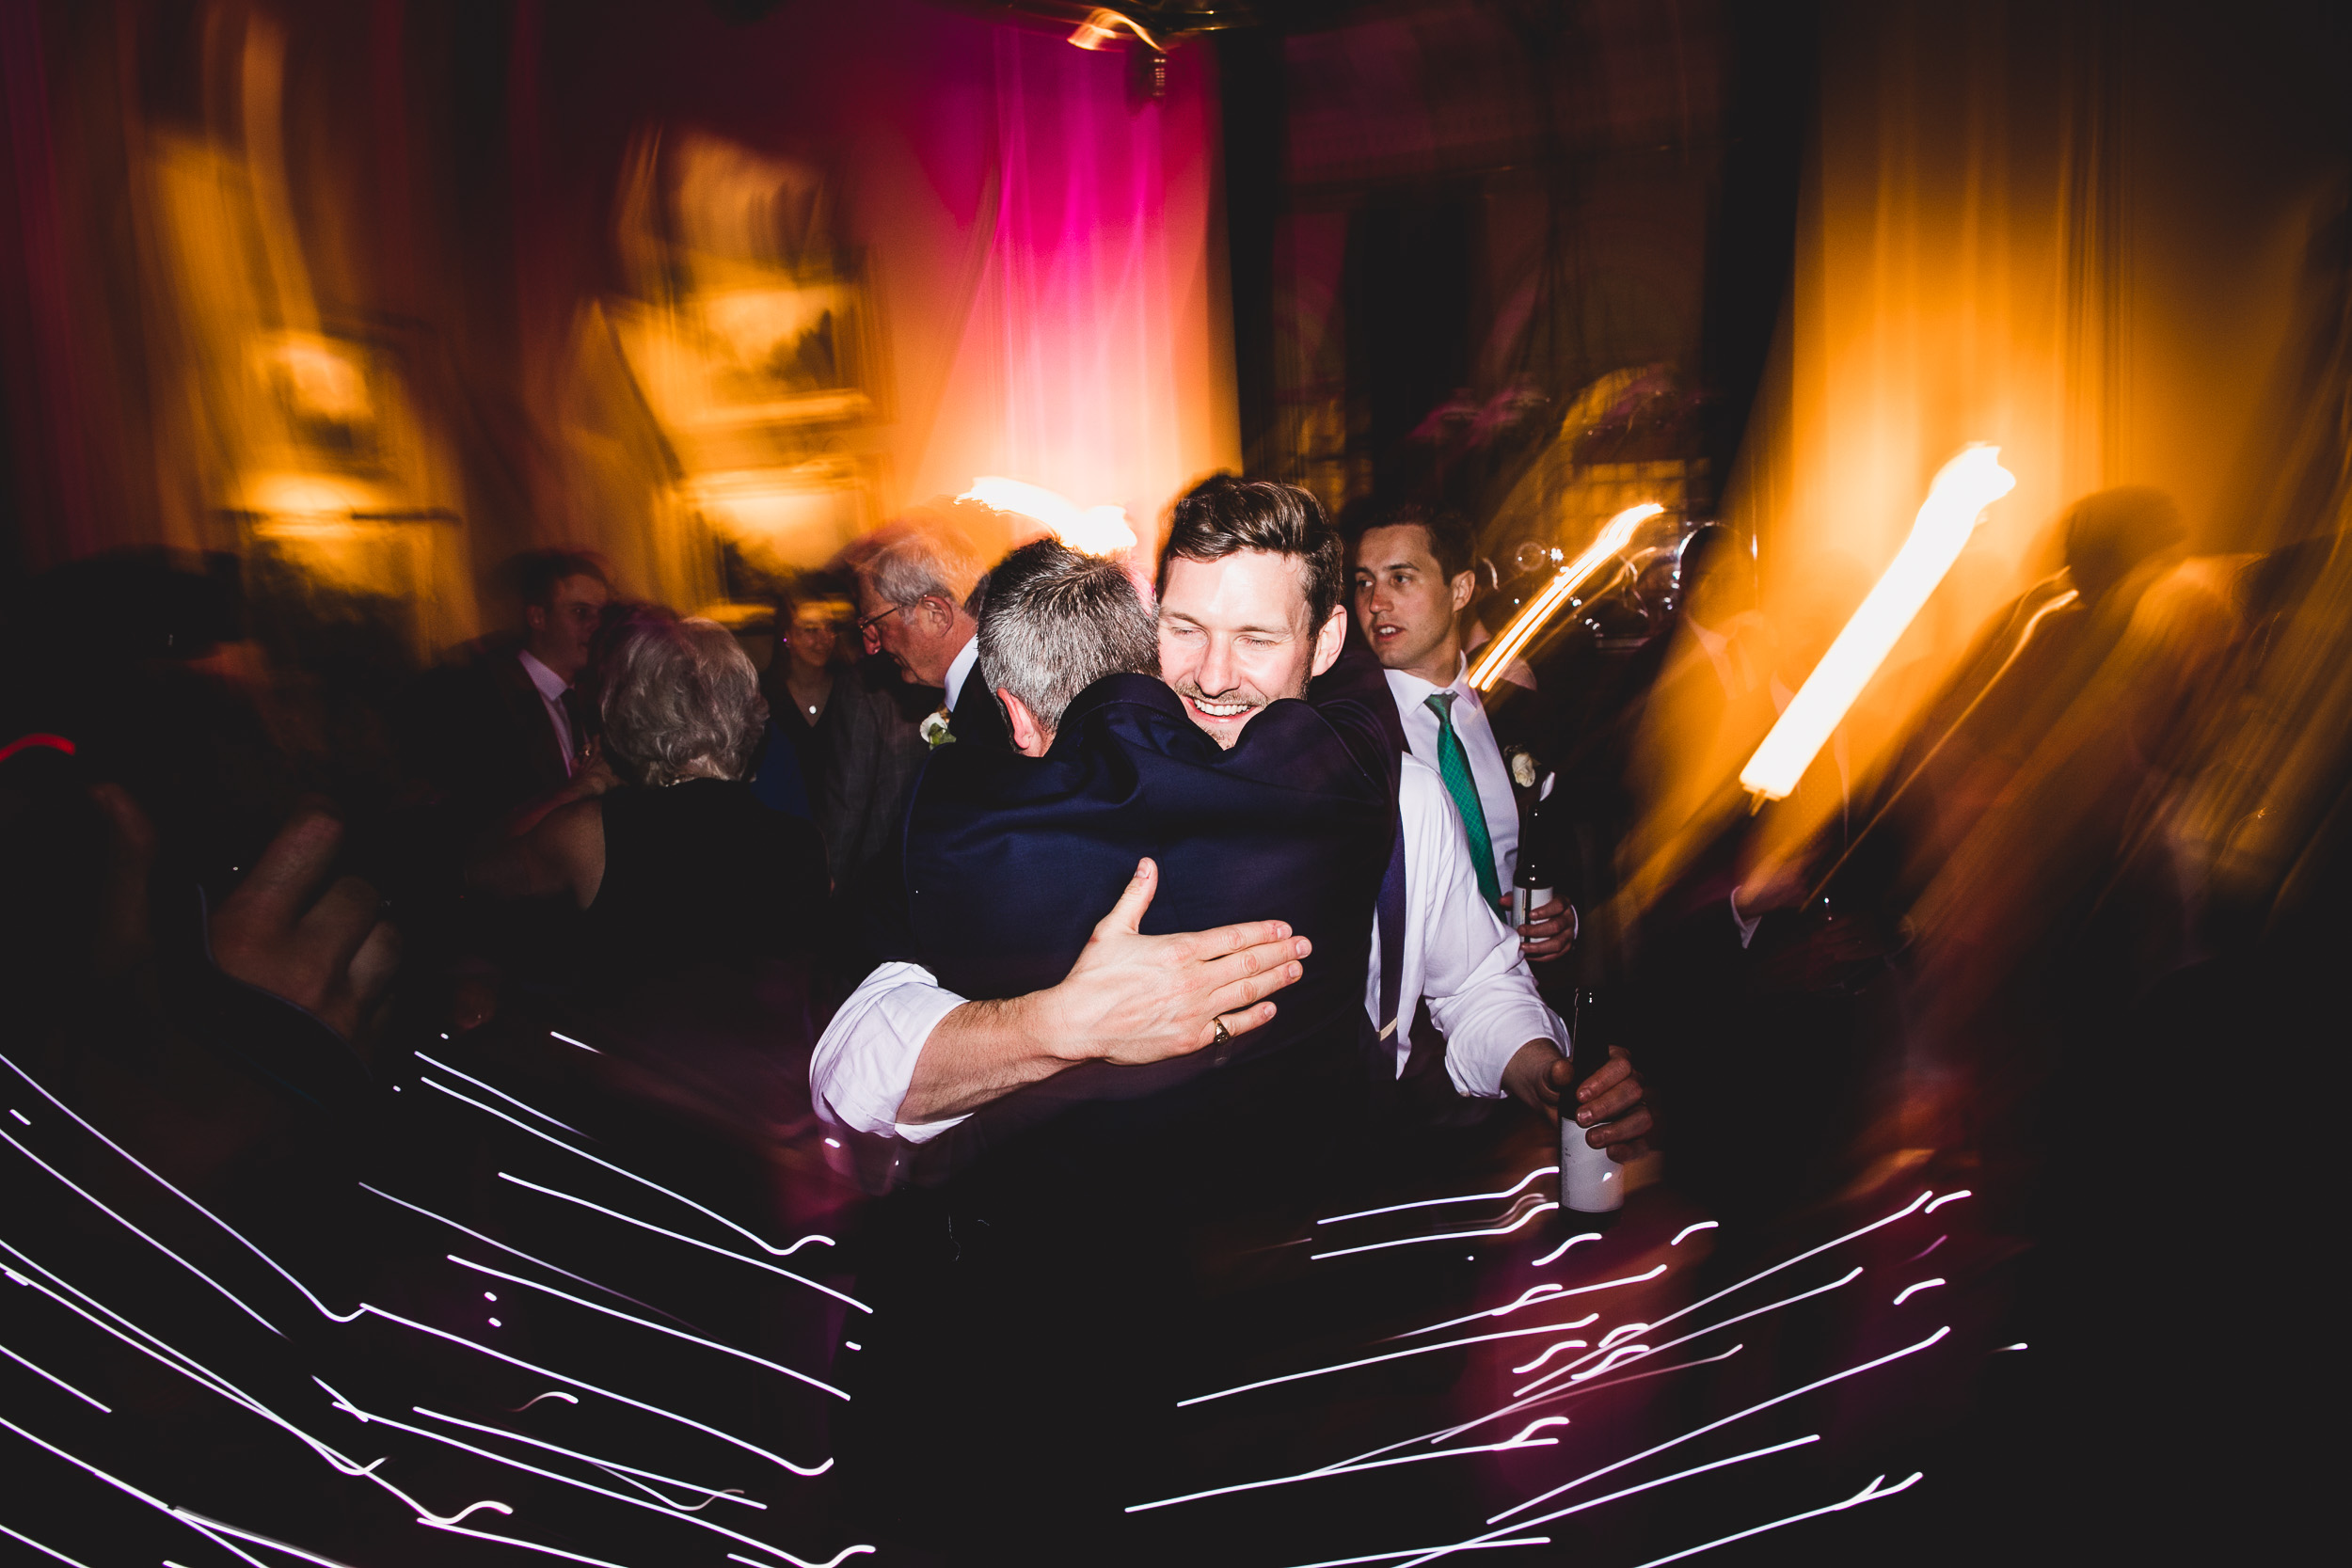 The groom is hugging another man at a wedding party.